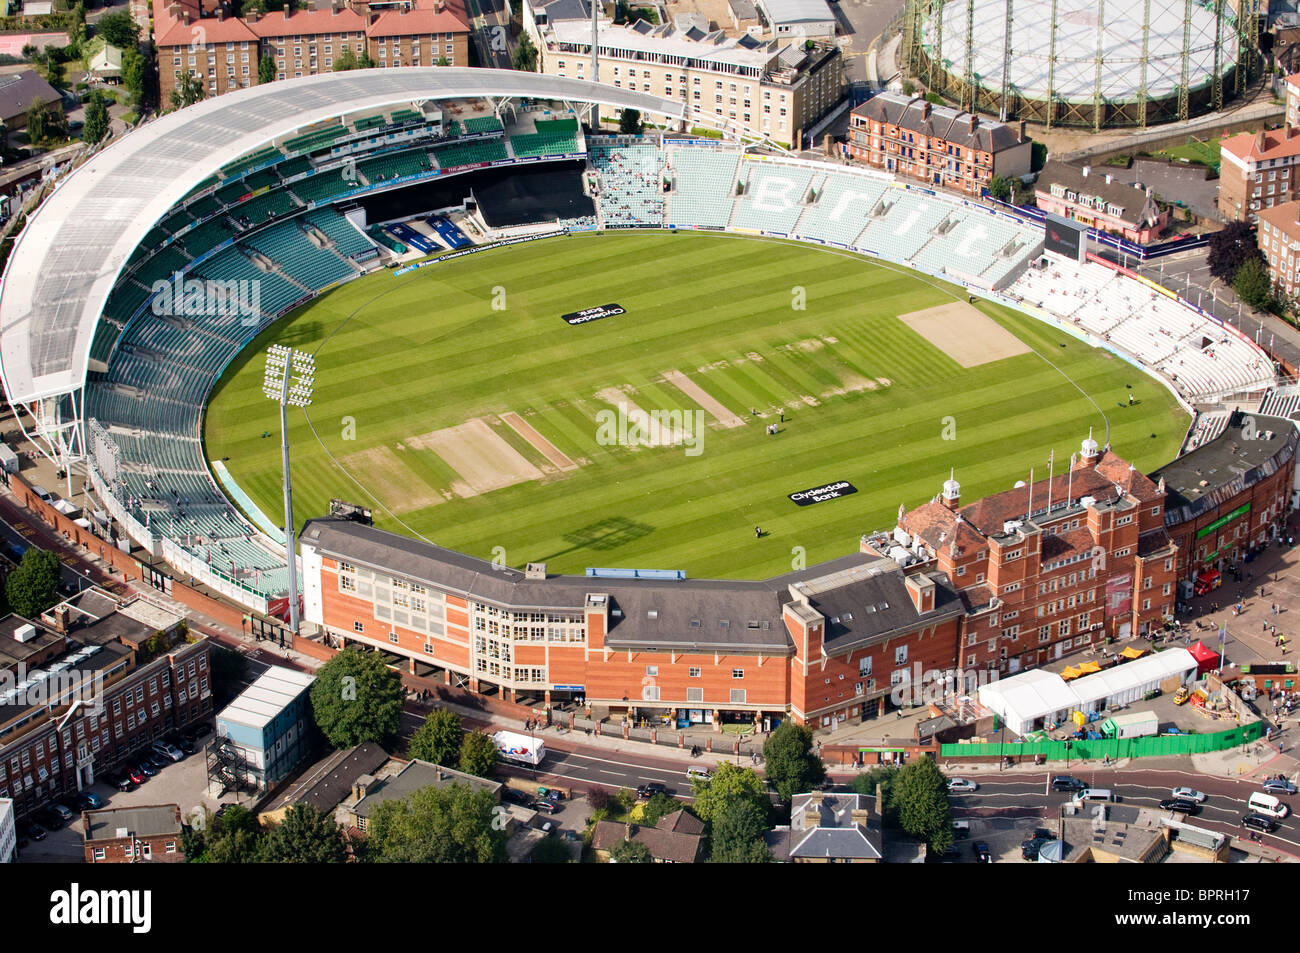 Aerial view of The Oval, cricket ground in Kennington, London, England. It is an international and county cricket venue. Stock Photo